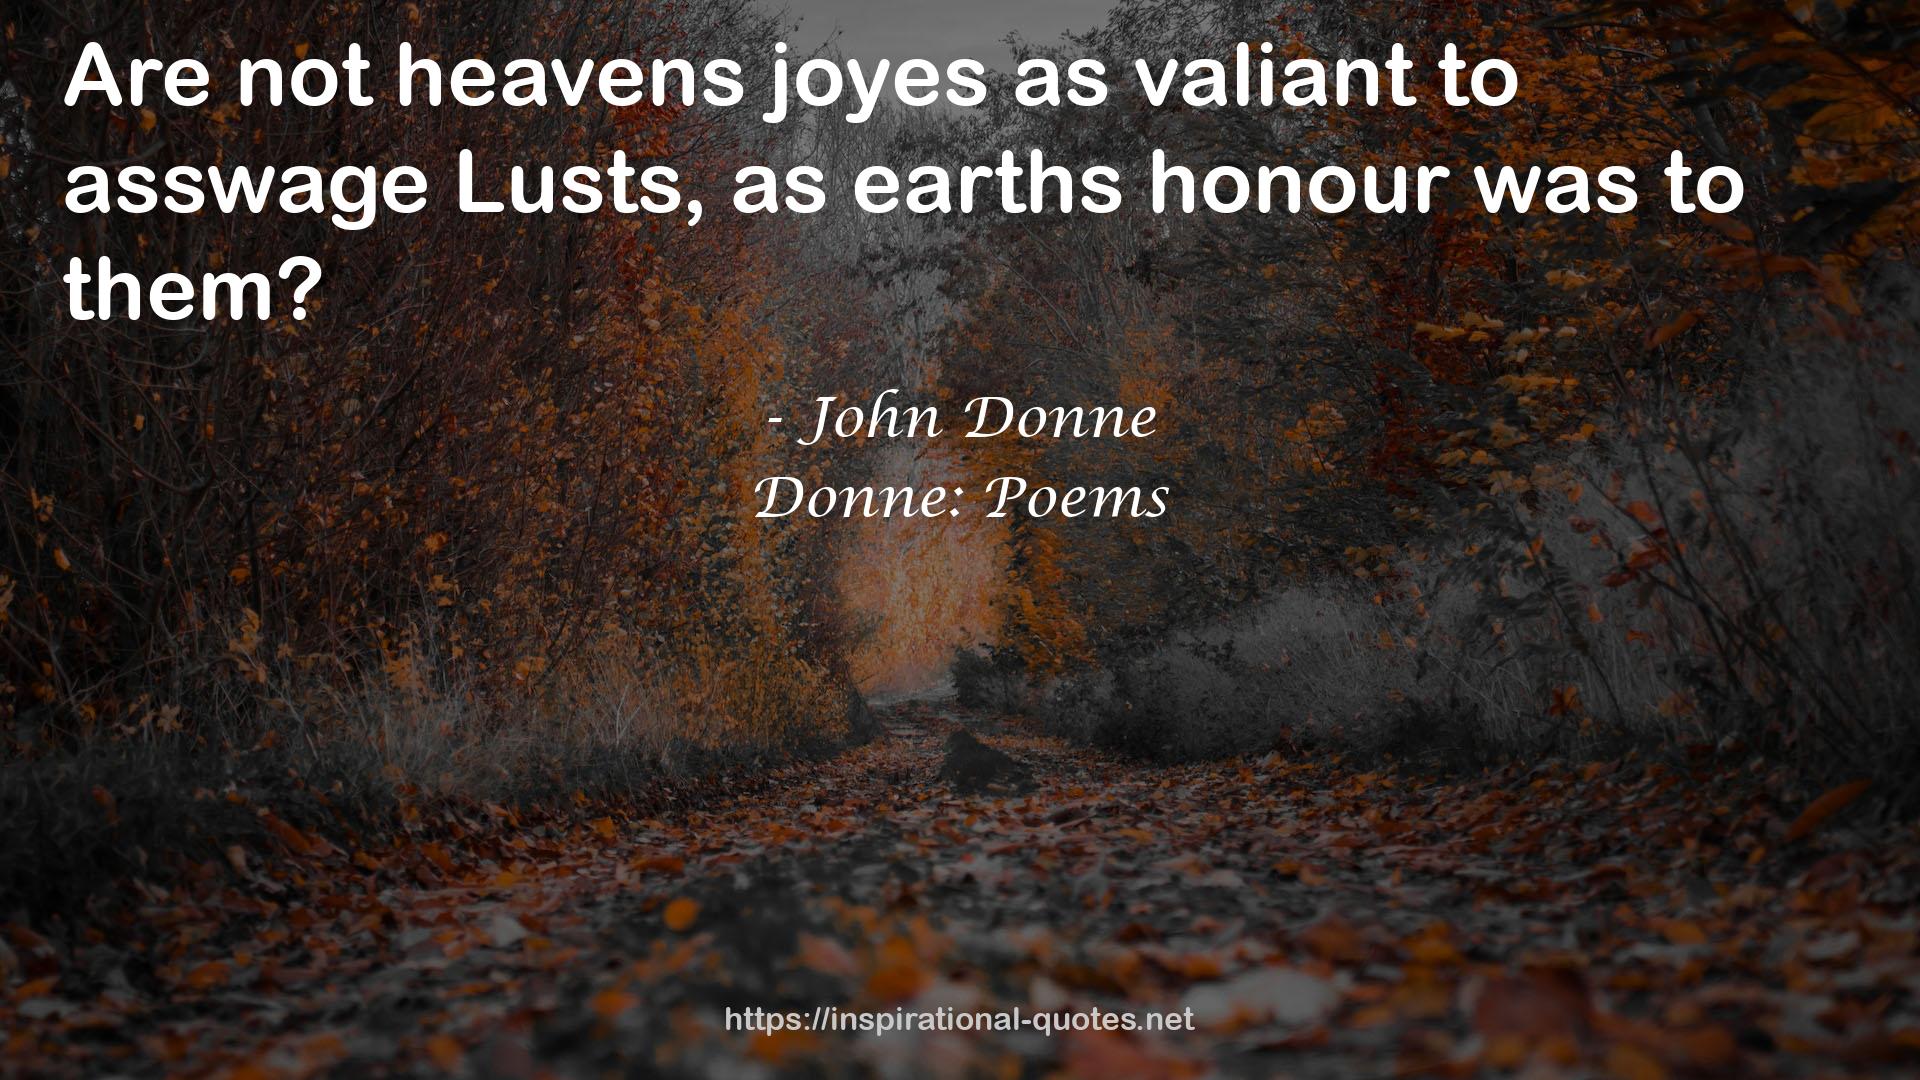 Donne: Poems QUOTES